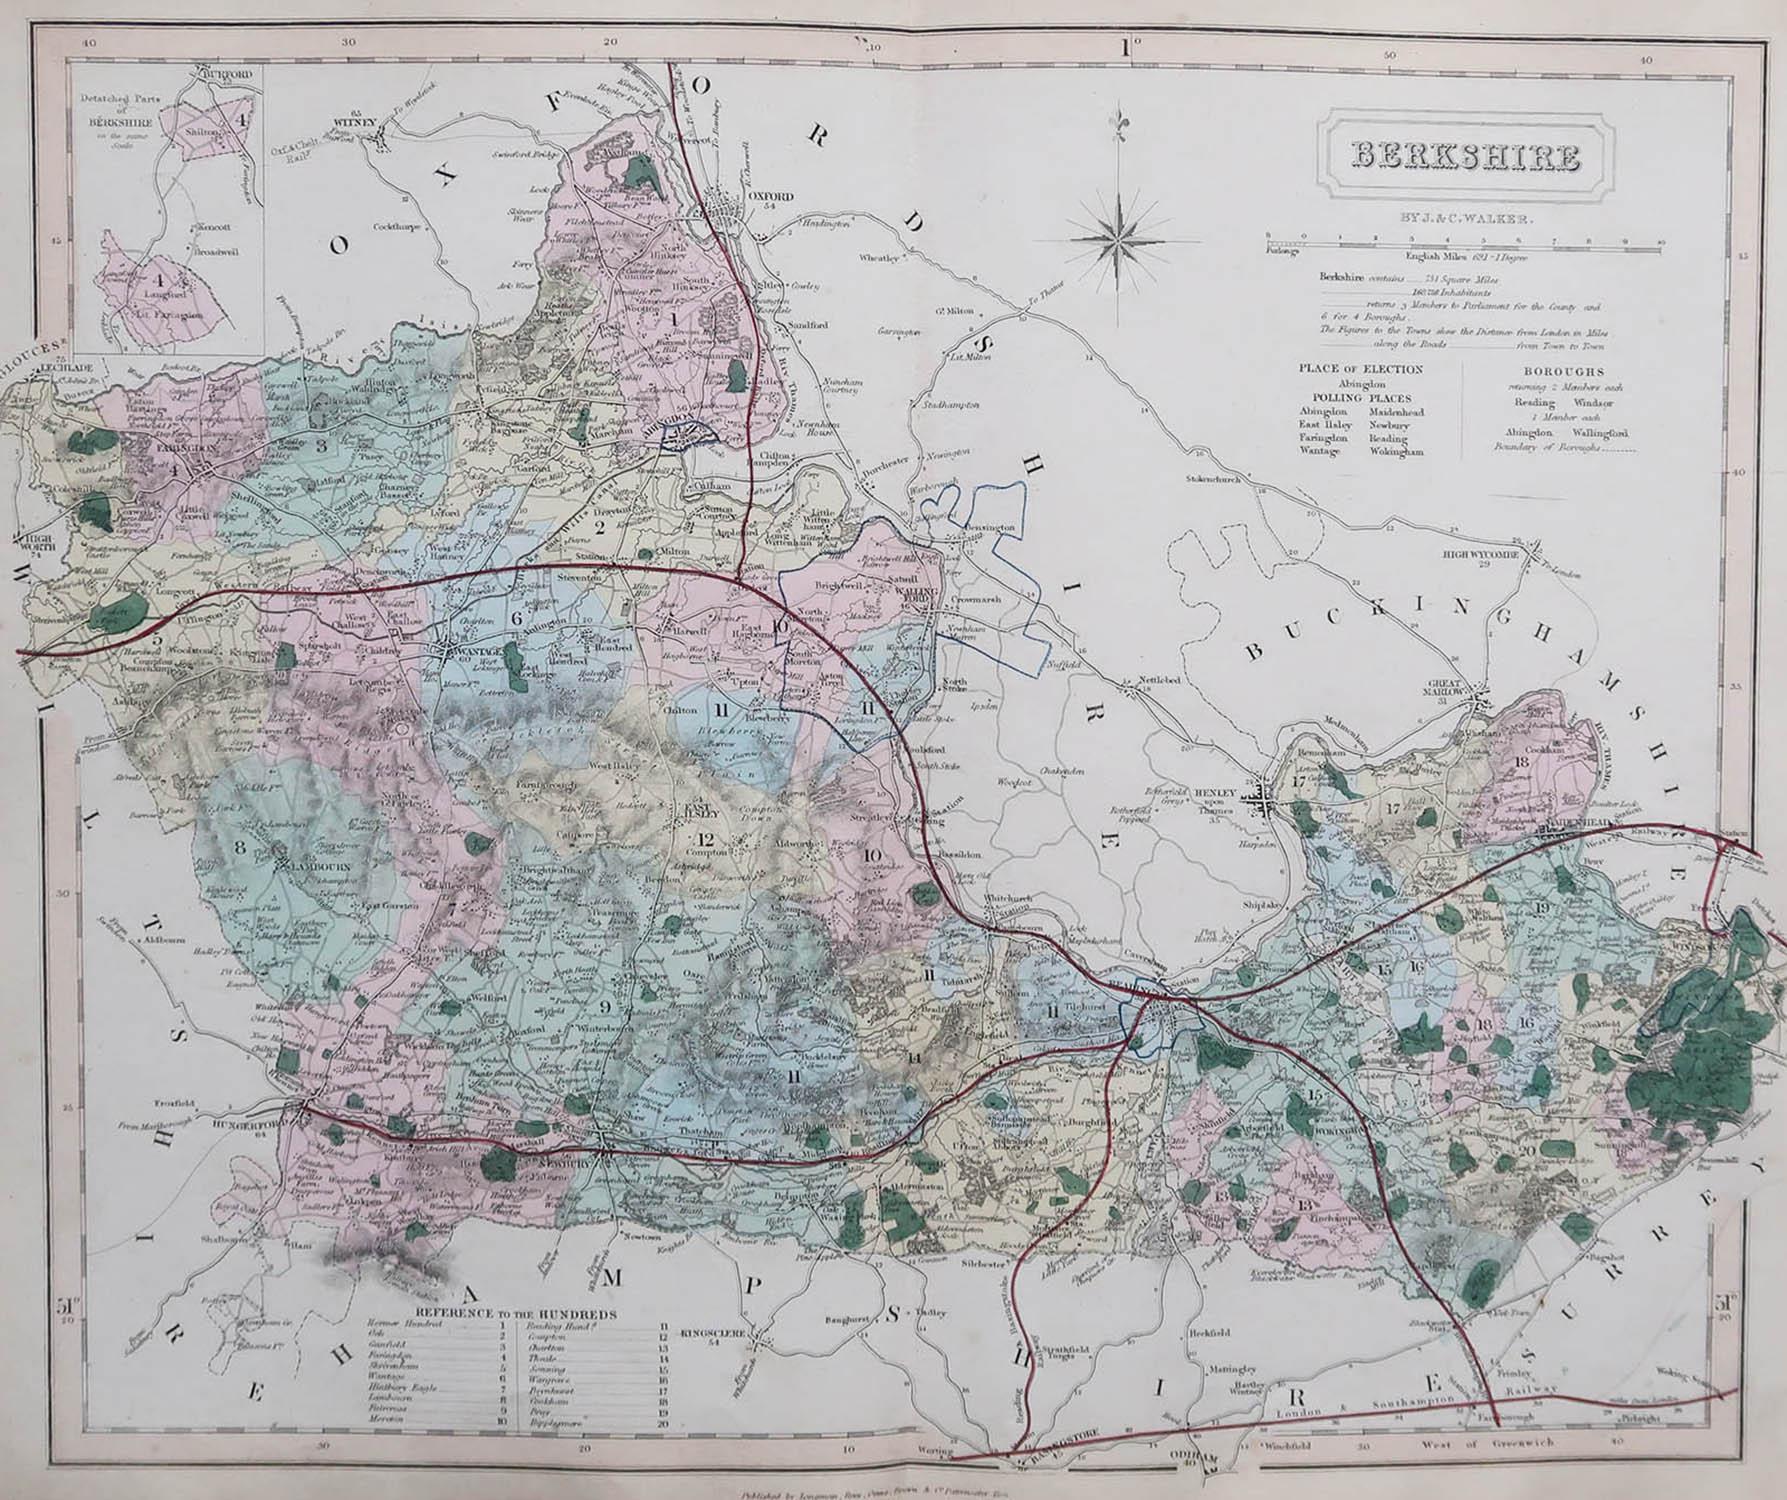 Great map of Berkshire

Original colour

By J & C Walker

Published by Longman, Rees, Orme, Brown & Co. 1851

Unframed.




